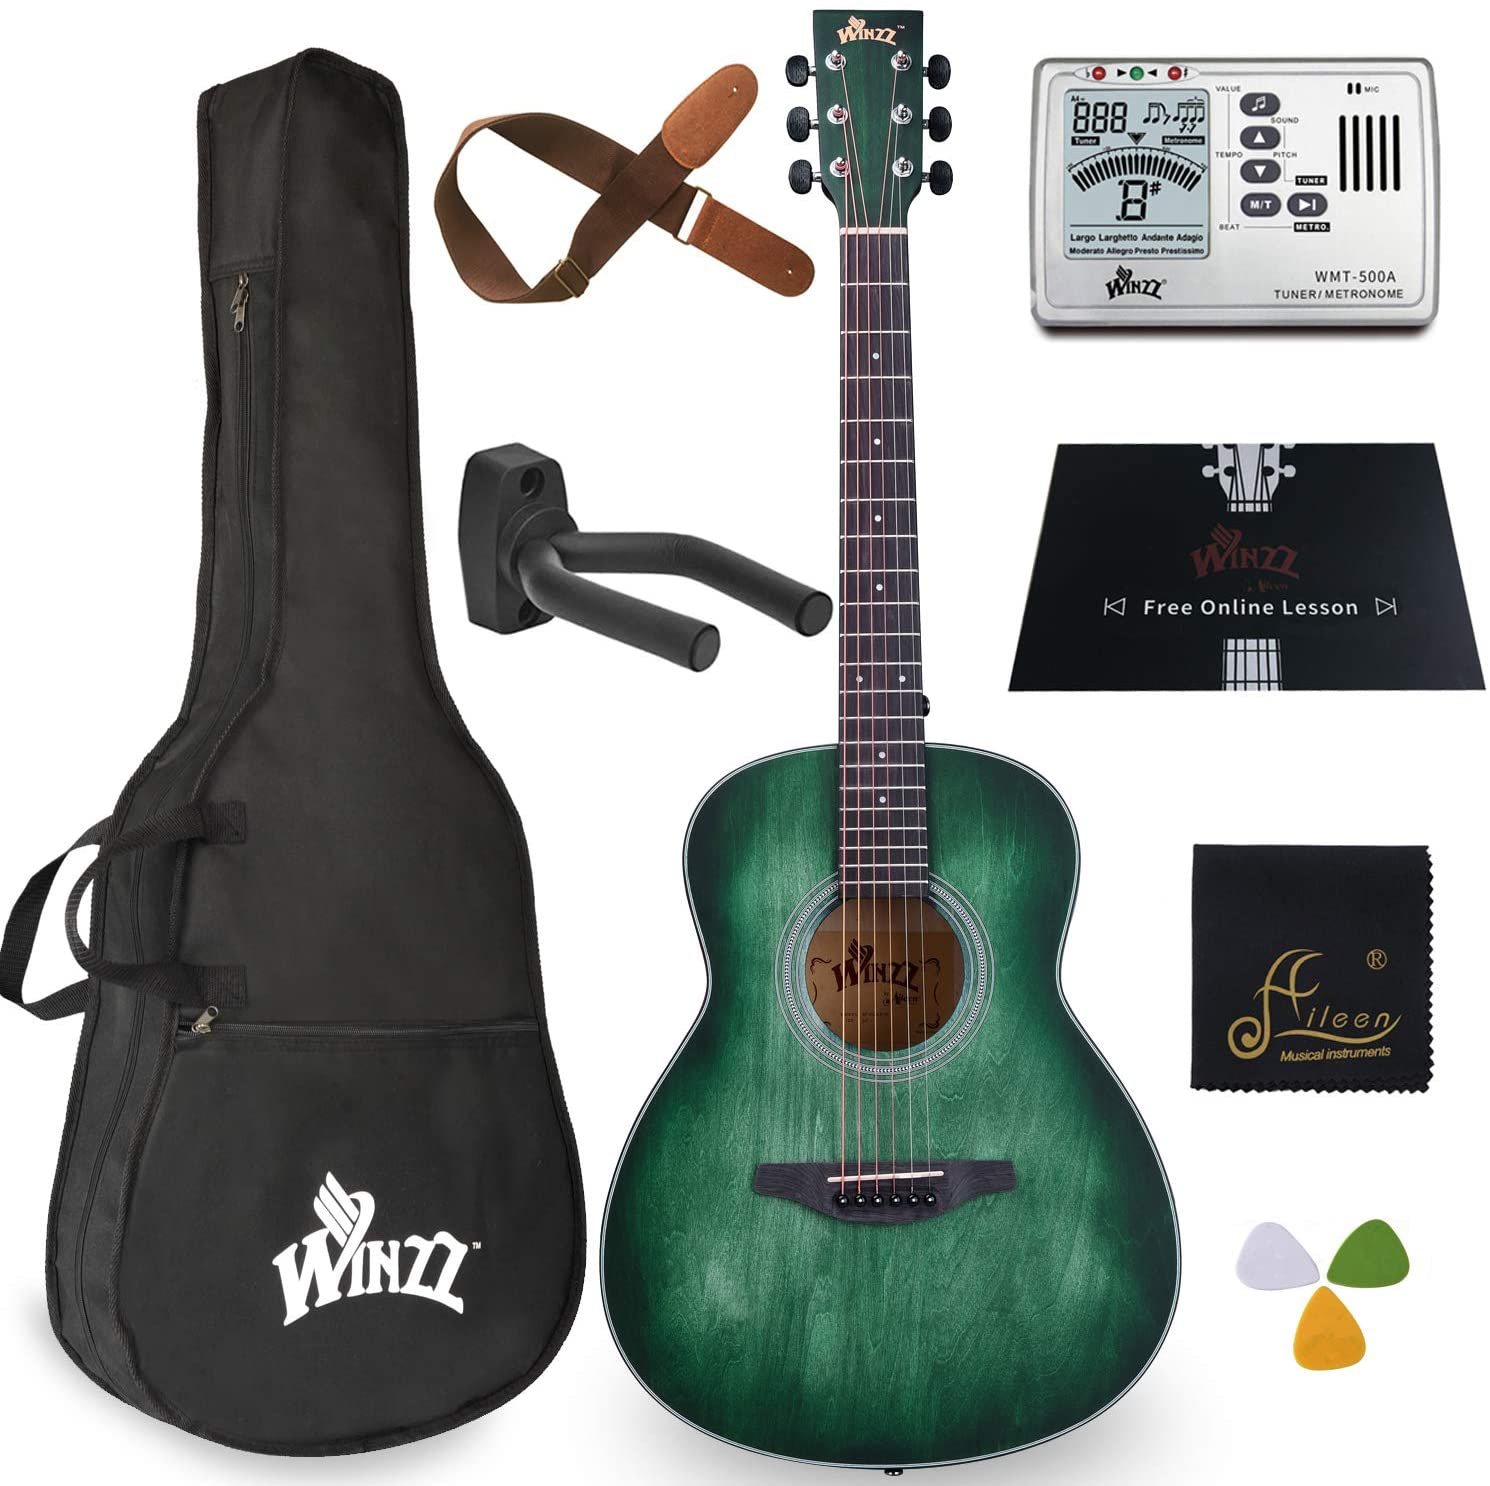 WINZZ 3/4 Dreadnought Acoustic Guitar Bundle with Online Lessons, Bag, Metronome Tuner, Wall-mounted Hanger, Strap, Picks & Cleaning Cloth,36 Inches Right Handed, Dark Hunter Green 9